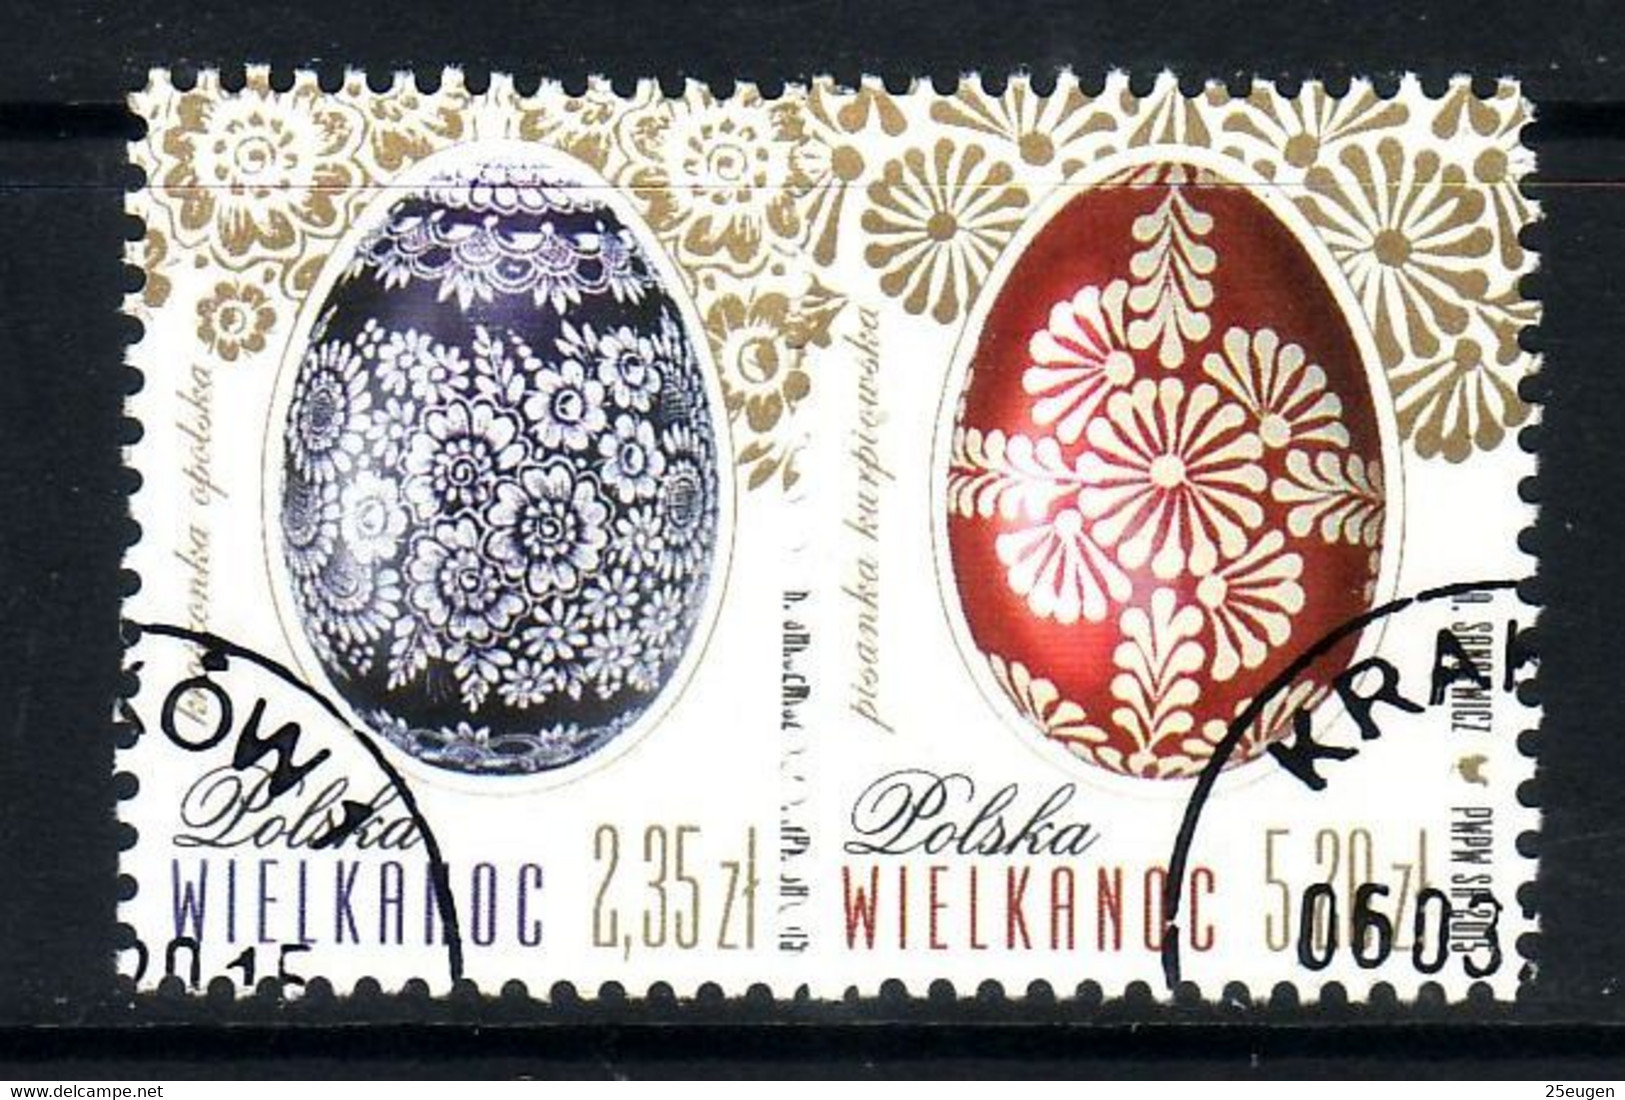 POLAND 2015 Michel No 4754-55 Used - Used Stamps